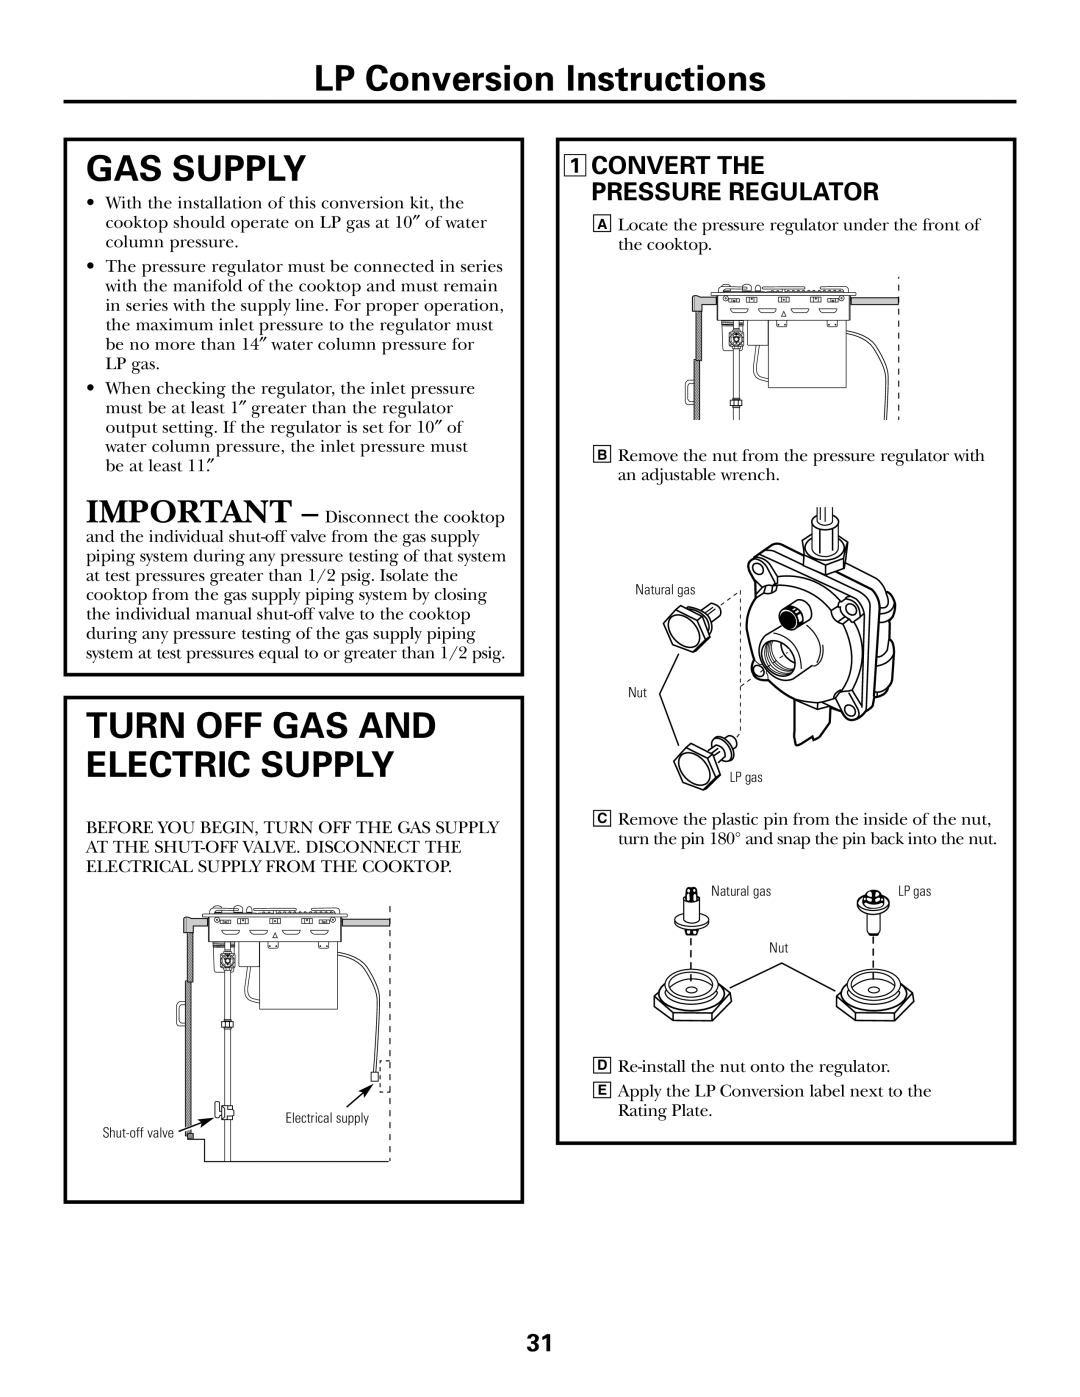 GE JGP990 manual LP Conversion Instructions, Gas Supply, Turn Off Gas And Electric Supply, 1CONVERT THE PRESSURE REGULATOR 